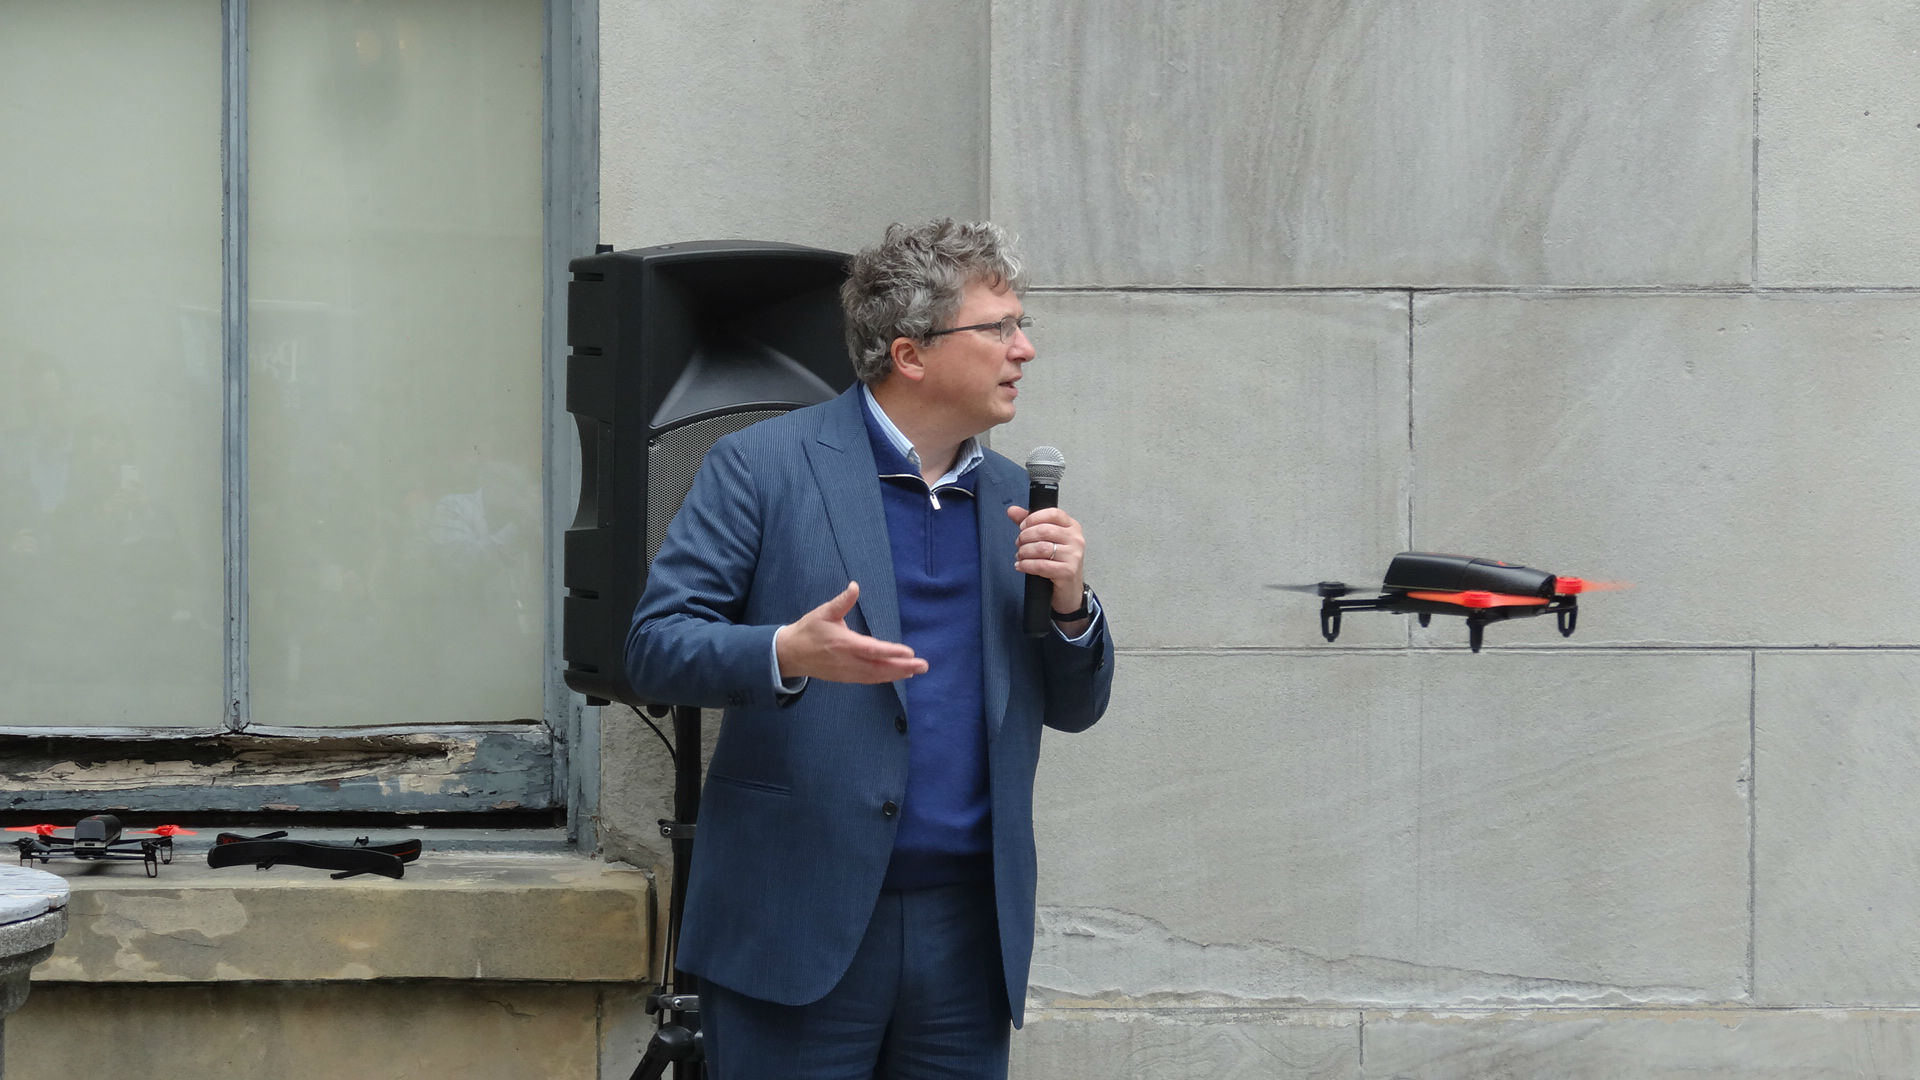 Parrot’s New Bebop Drone Wants To Be Your Eyes In The Skies